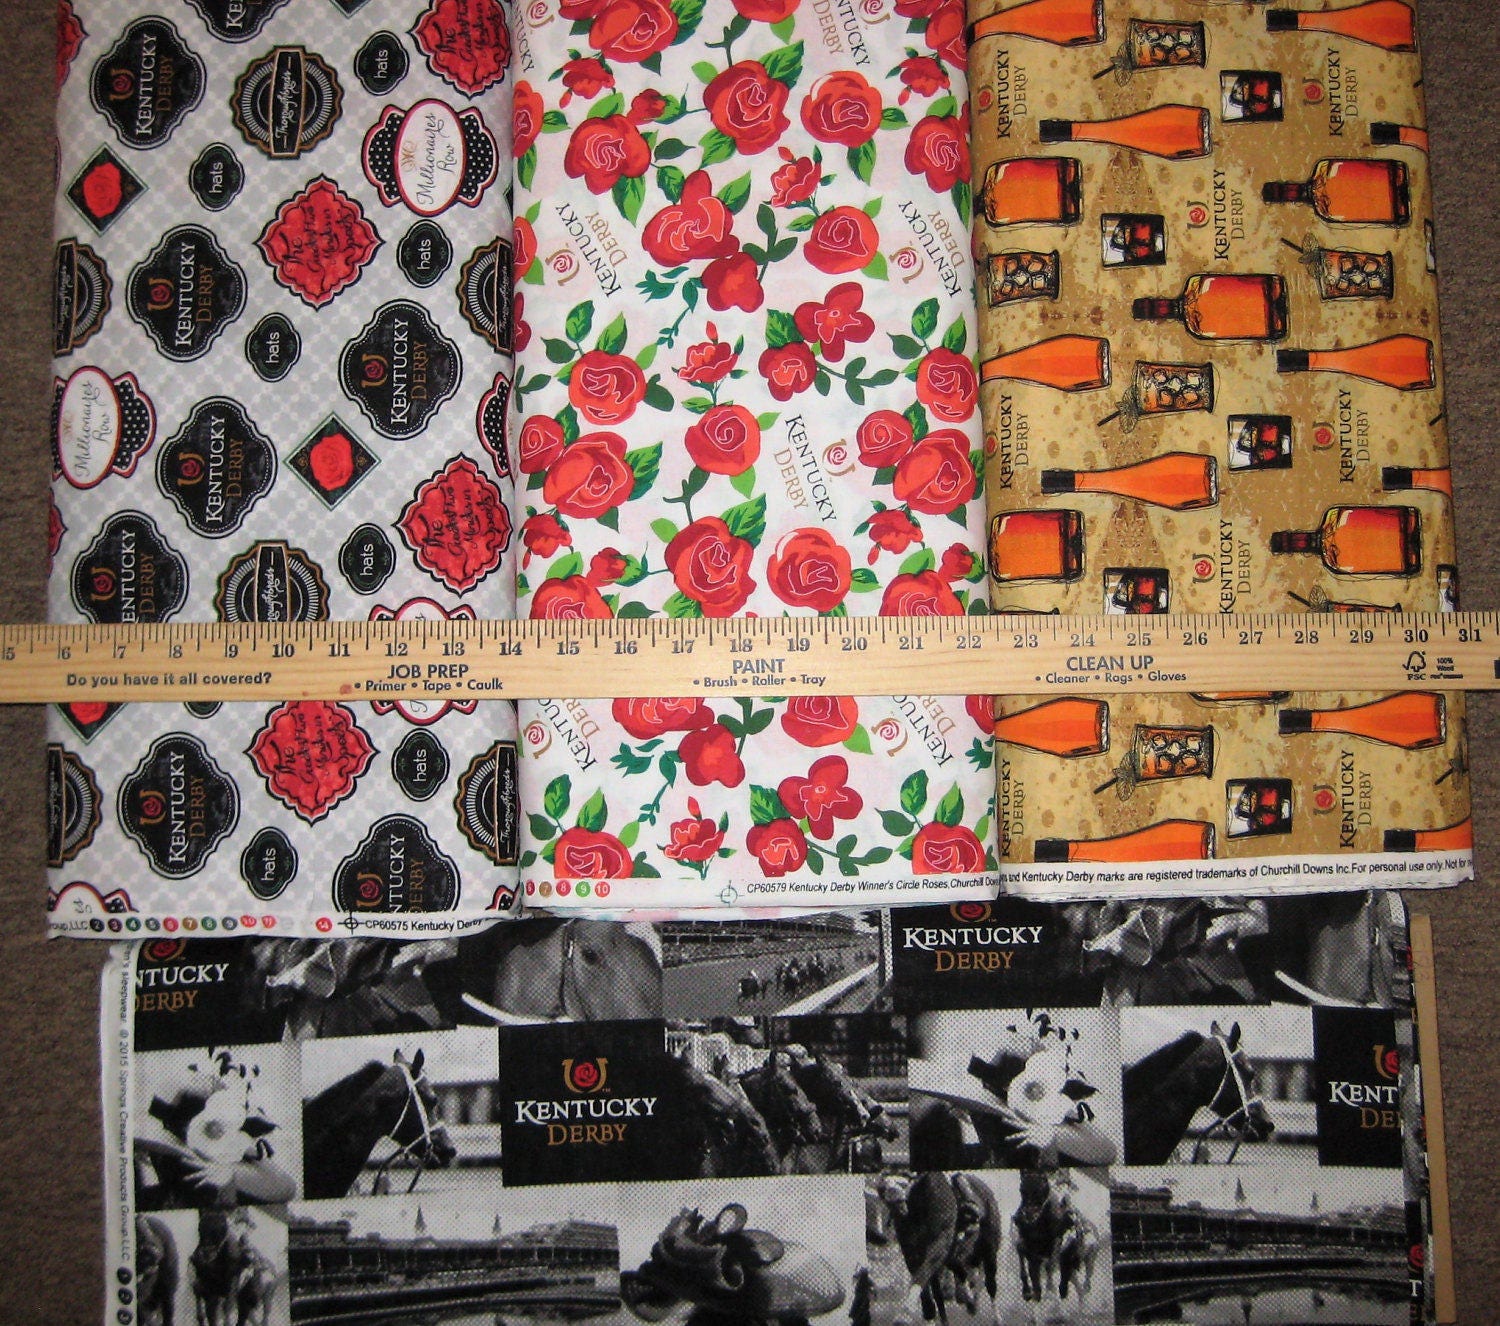 Kentucky Derby Cotton Fabric by Springs Creative 4 Options